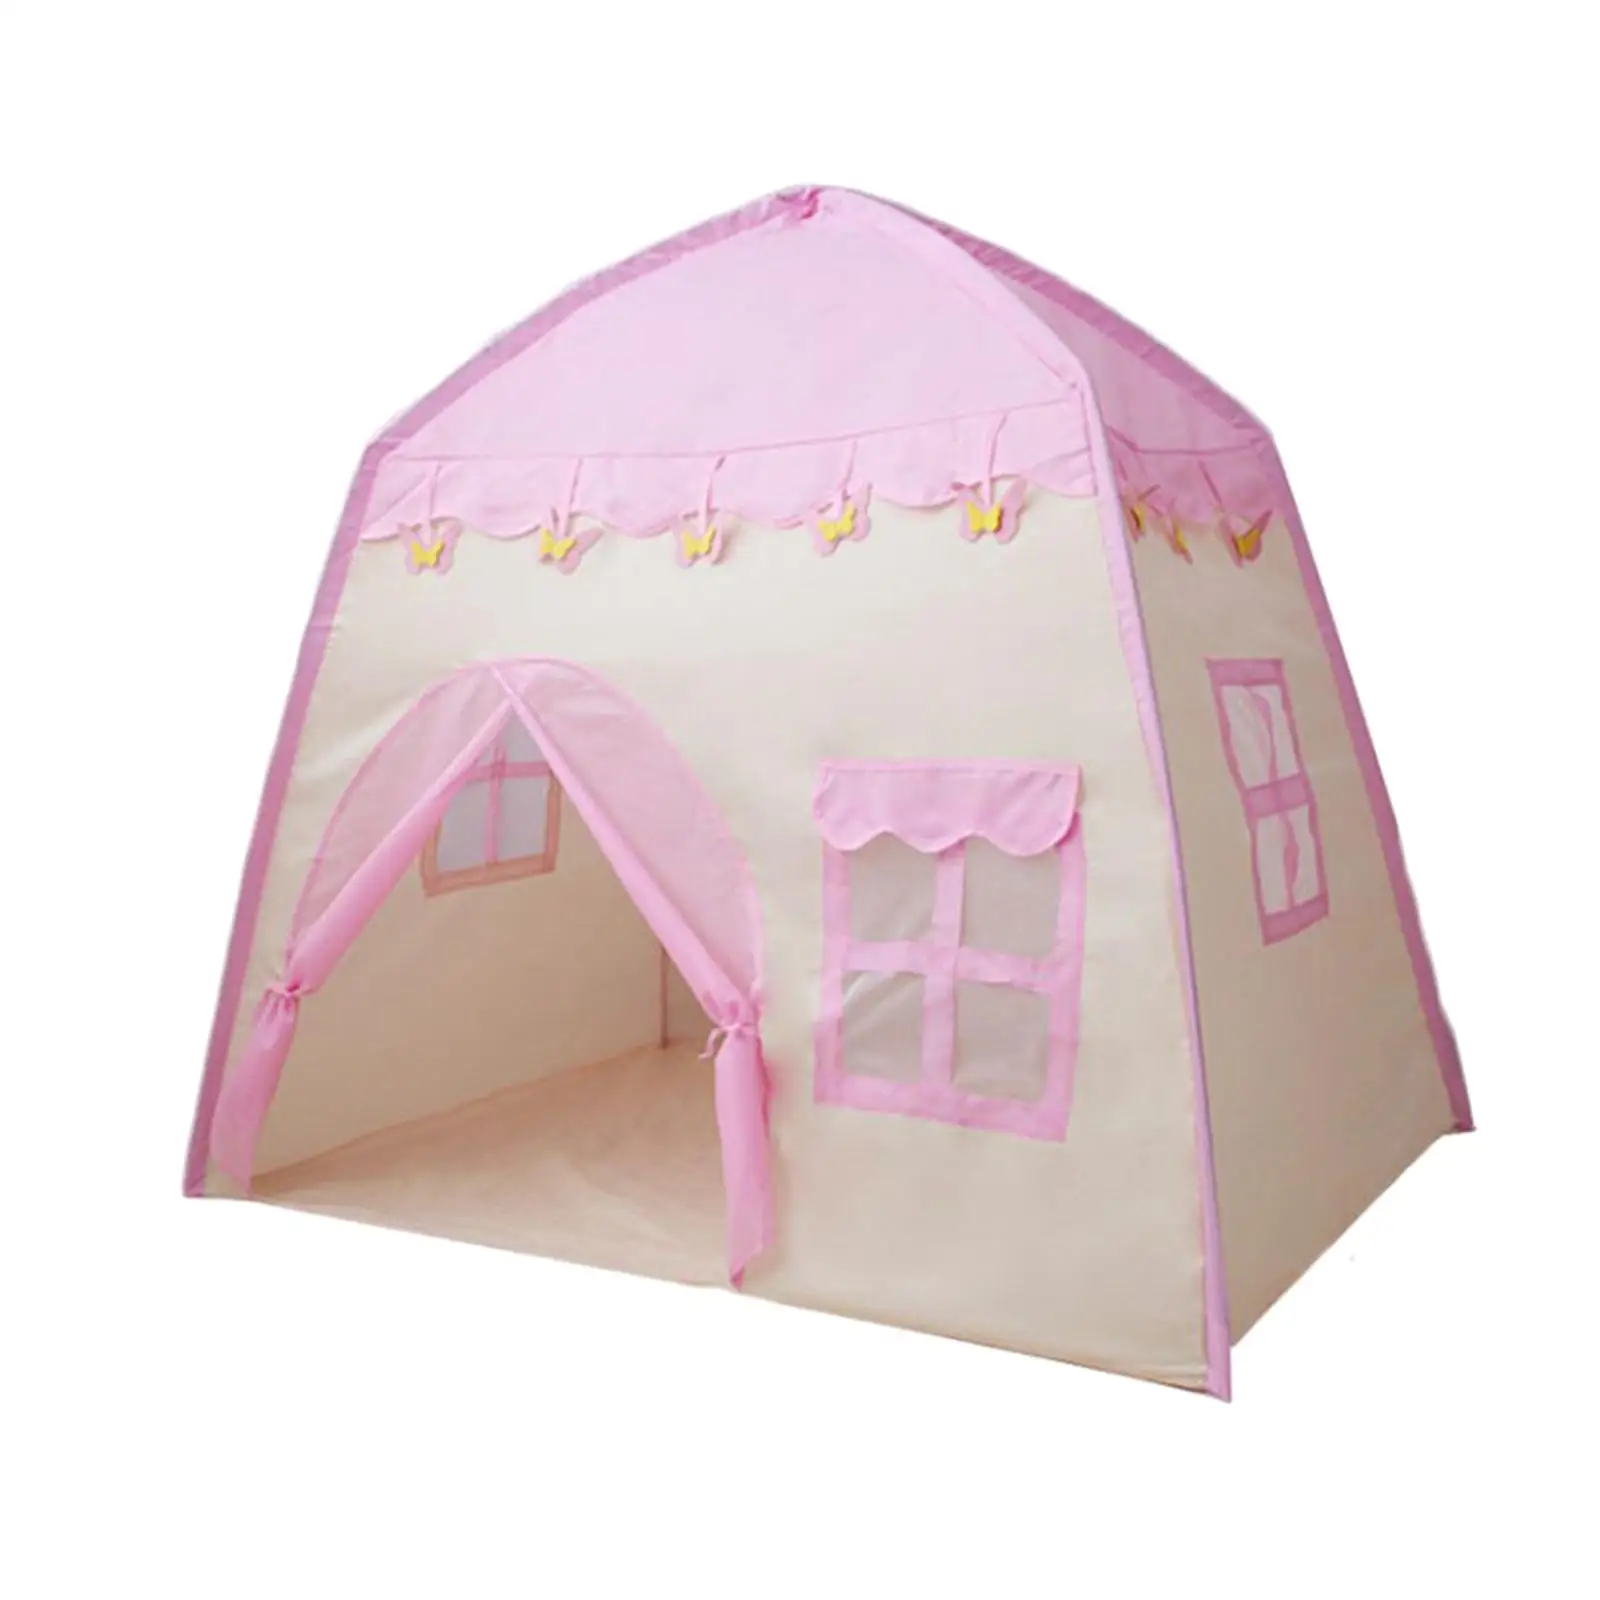 Kids Play Tent Outdoor Indoor Game Tent Game Easy Installation for Home